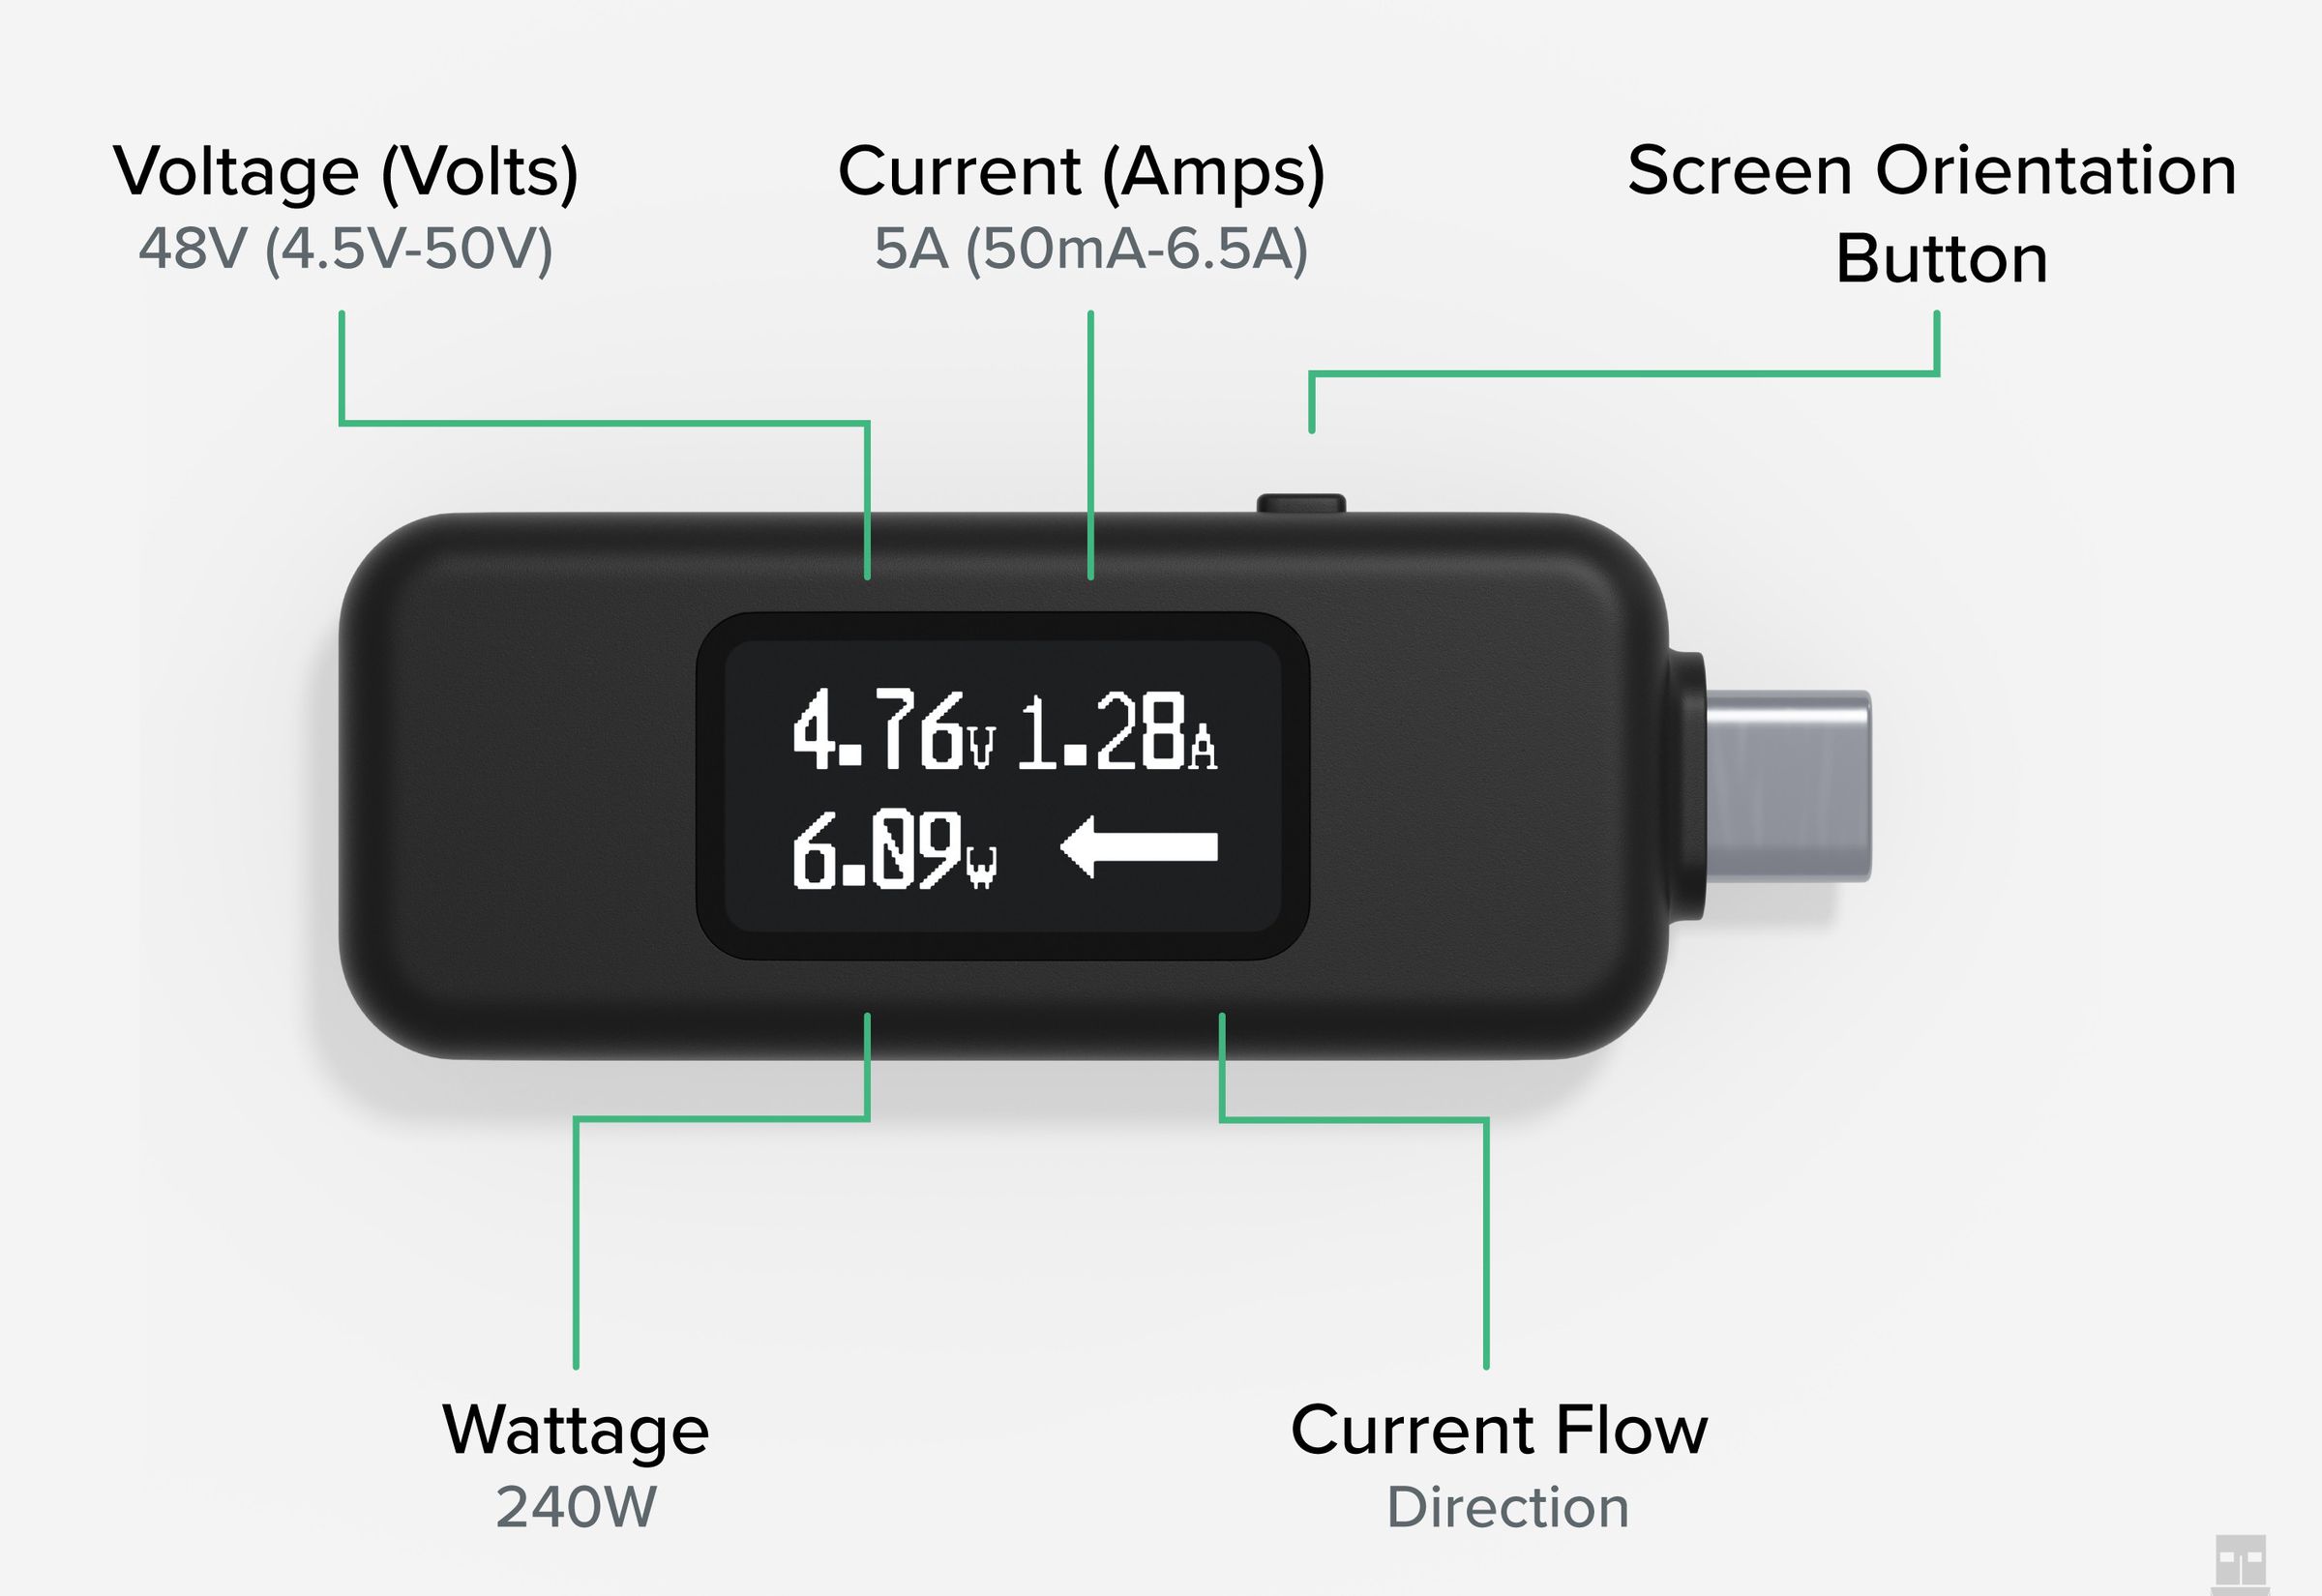 You can see volts, amps, screen orientation, and the direction of the current flow. Example: 4.76 volts, 1.28 amps, 6.09 watts.